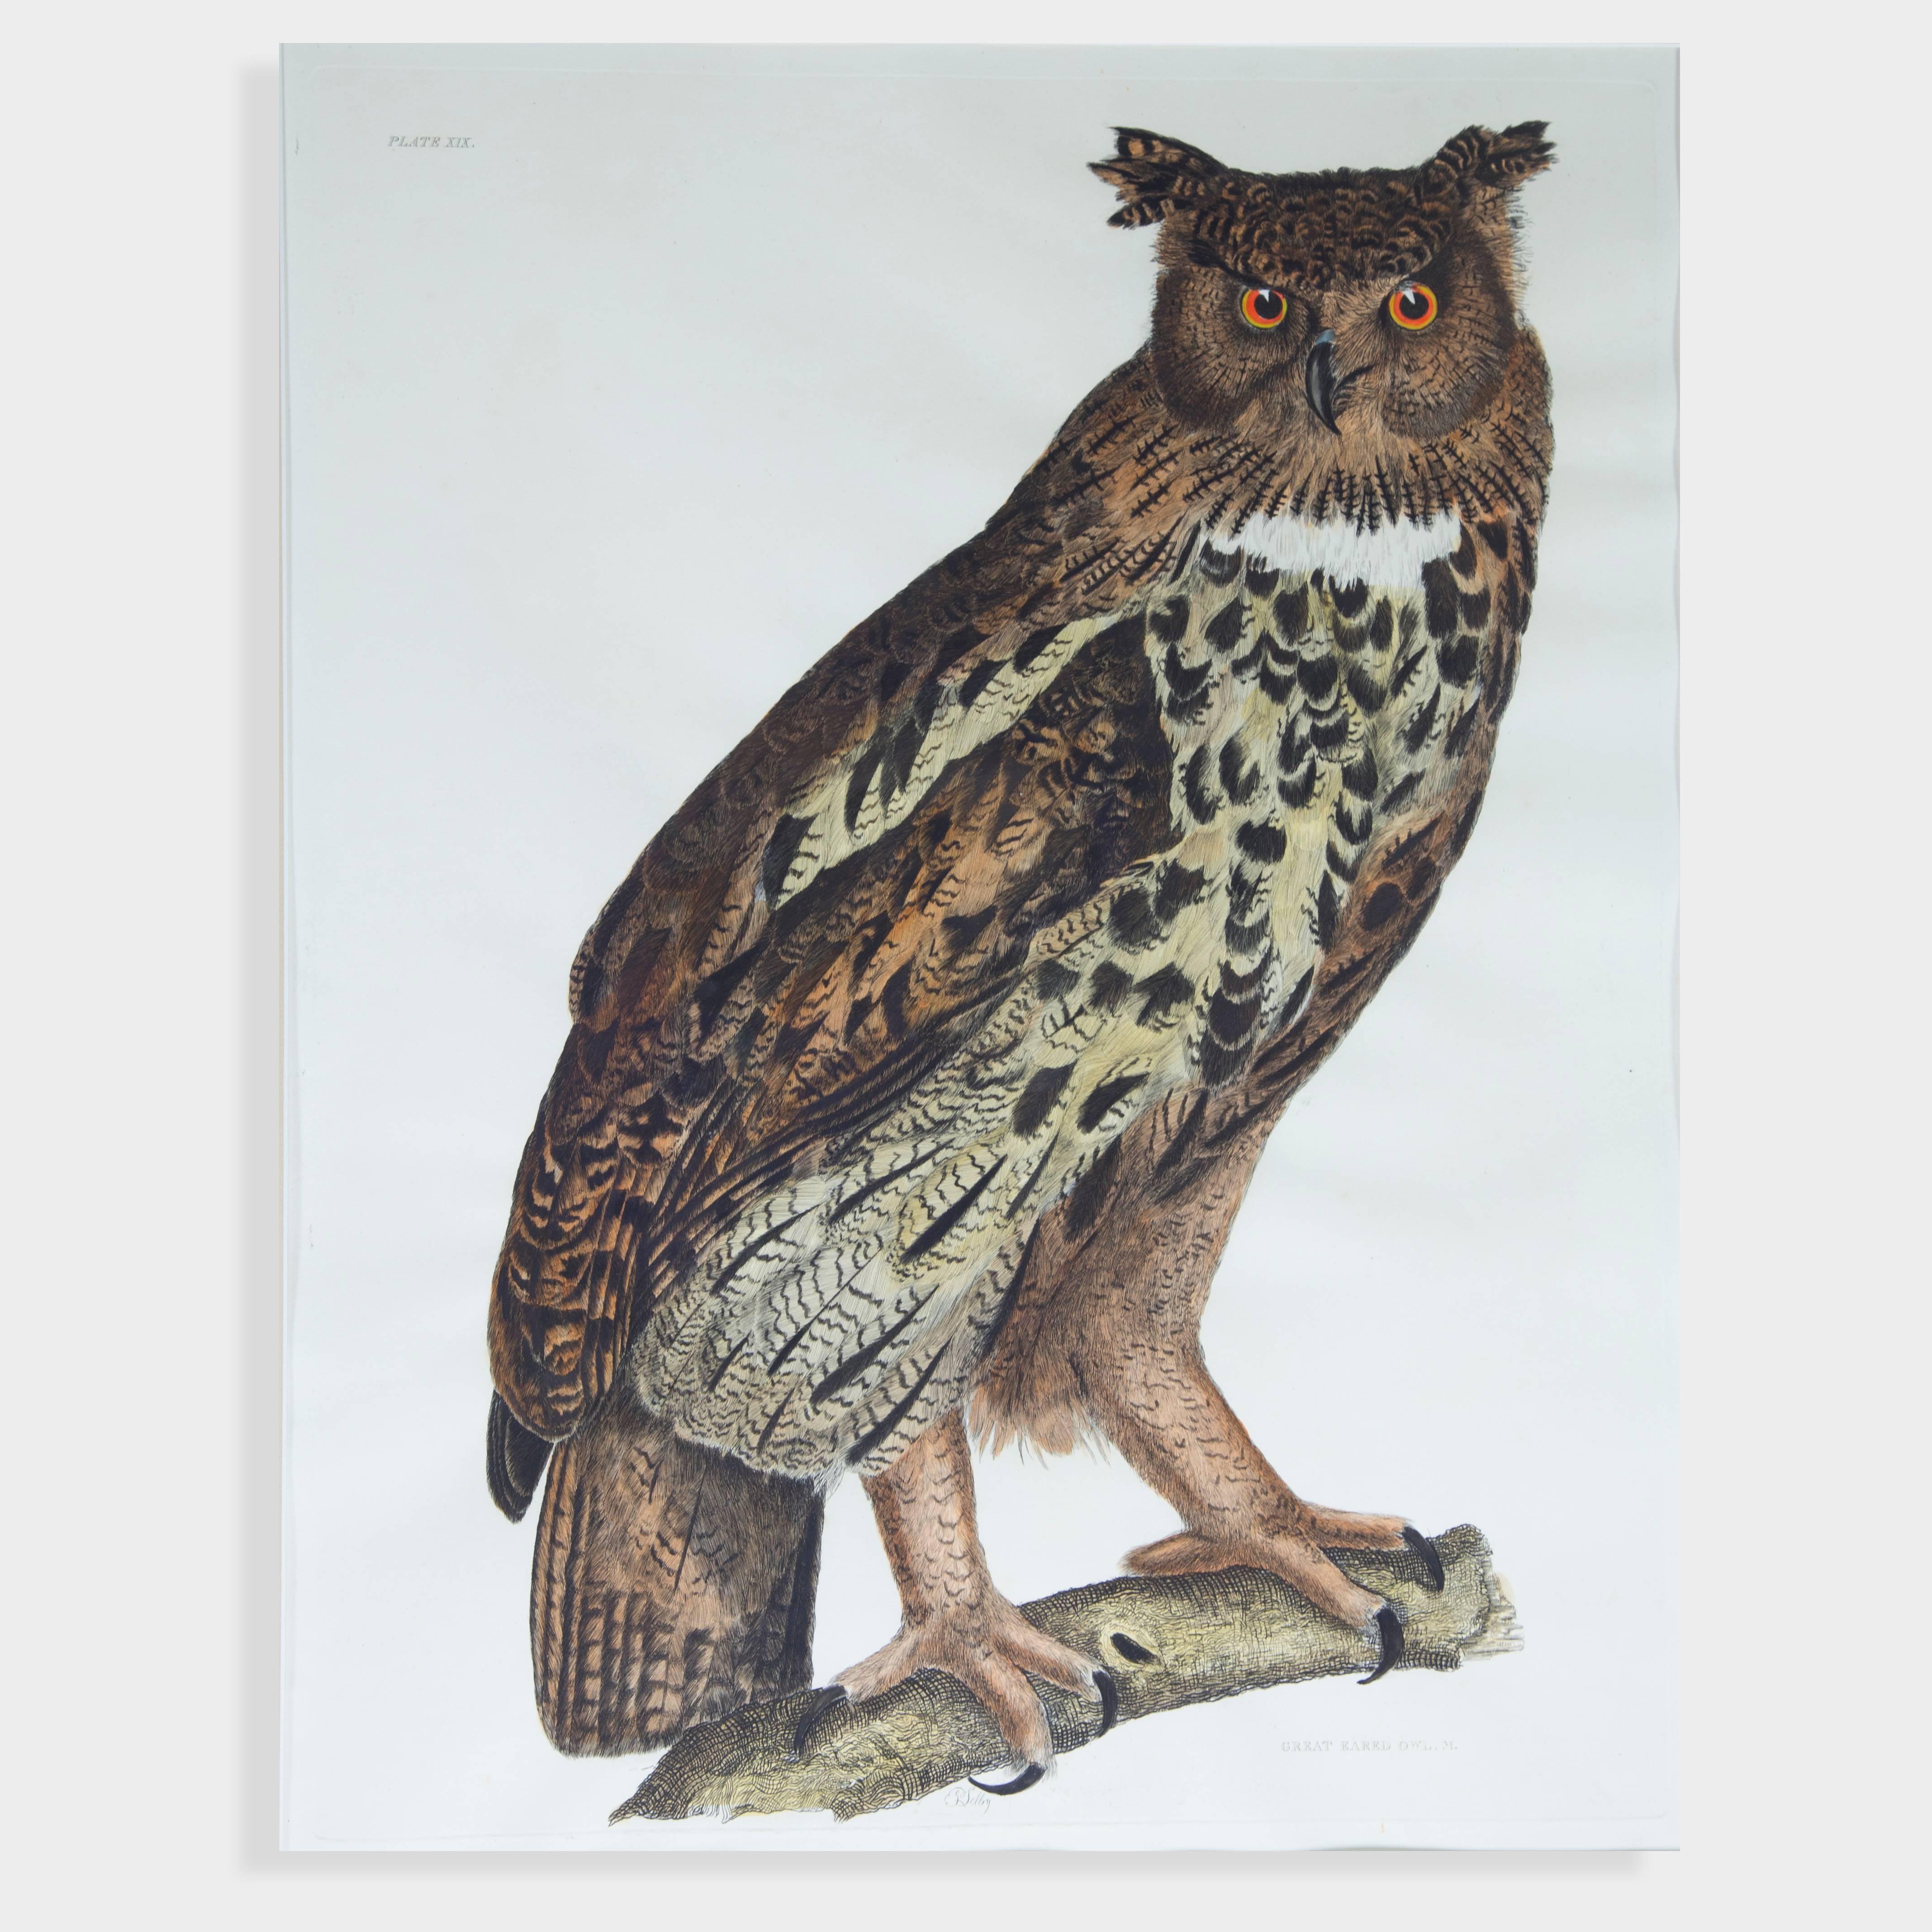 Beautiful hand colored wildlife print depicting the great eared owl. Plate number: XIX. Hand-colored engraving of a perched great eared owl
after the great naturalist  Alexander Wilson (1776-1813); Wilson is rightfully considered the father of